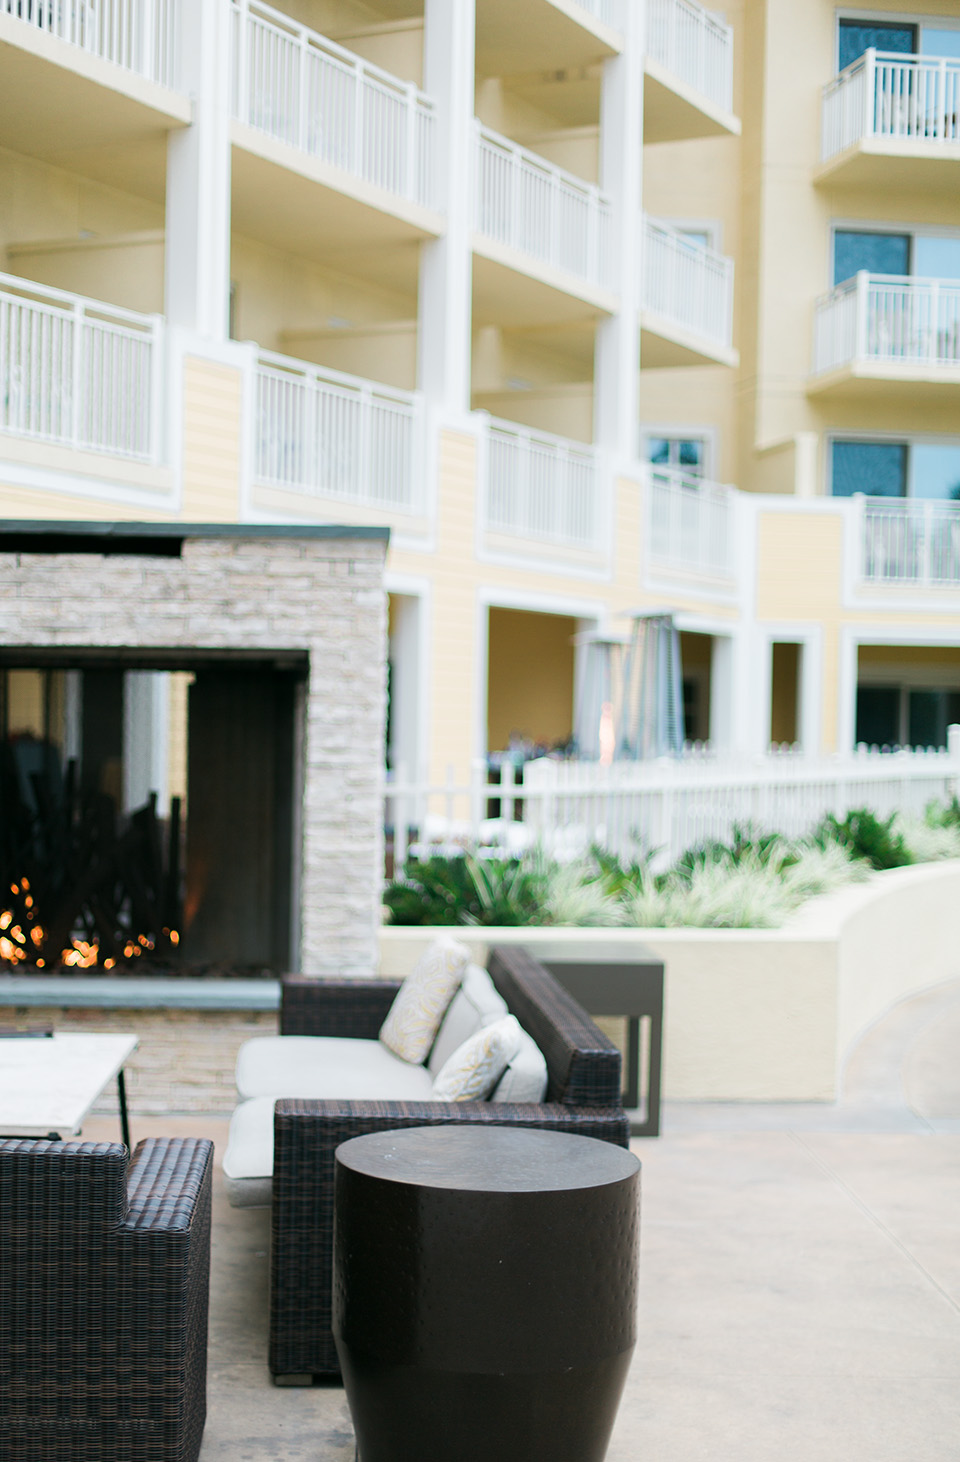 Image of one of the outdoor lounge areas at the Omni Amelia Island Plantation Resort.  There is a fireplace and comfortable furniture for sitting.